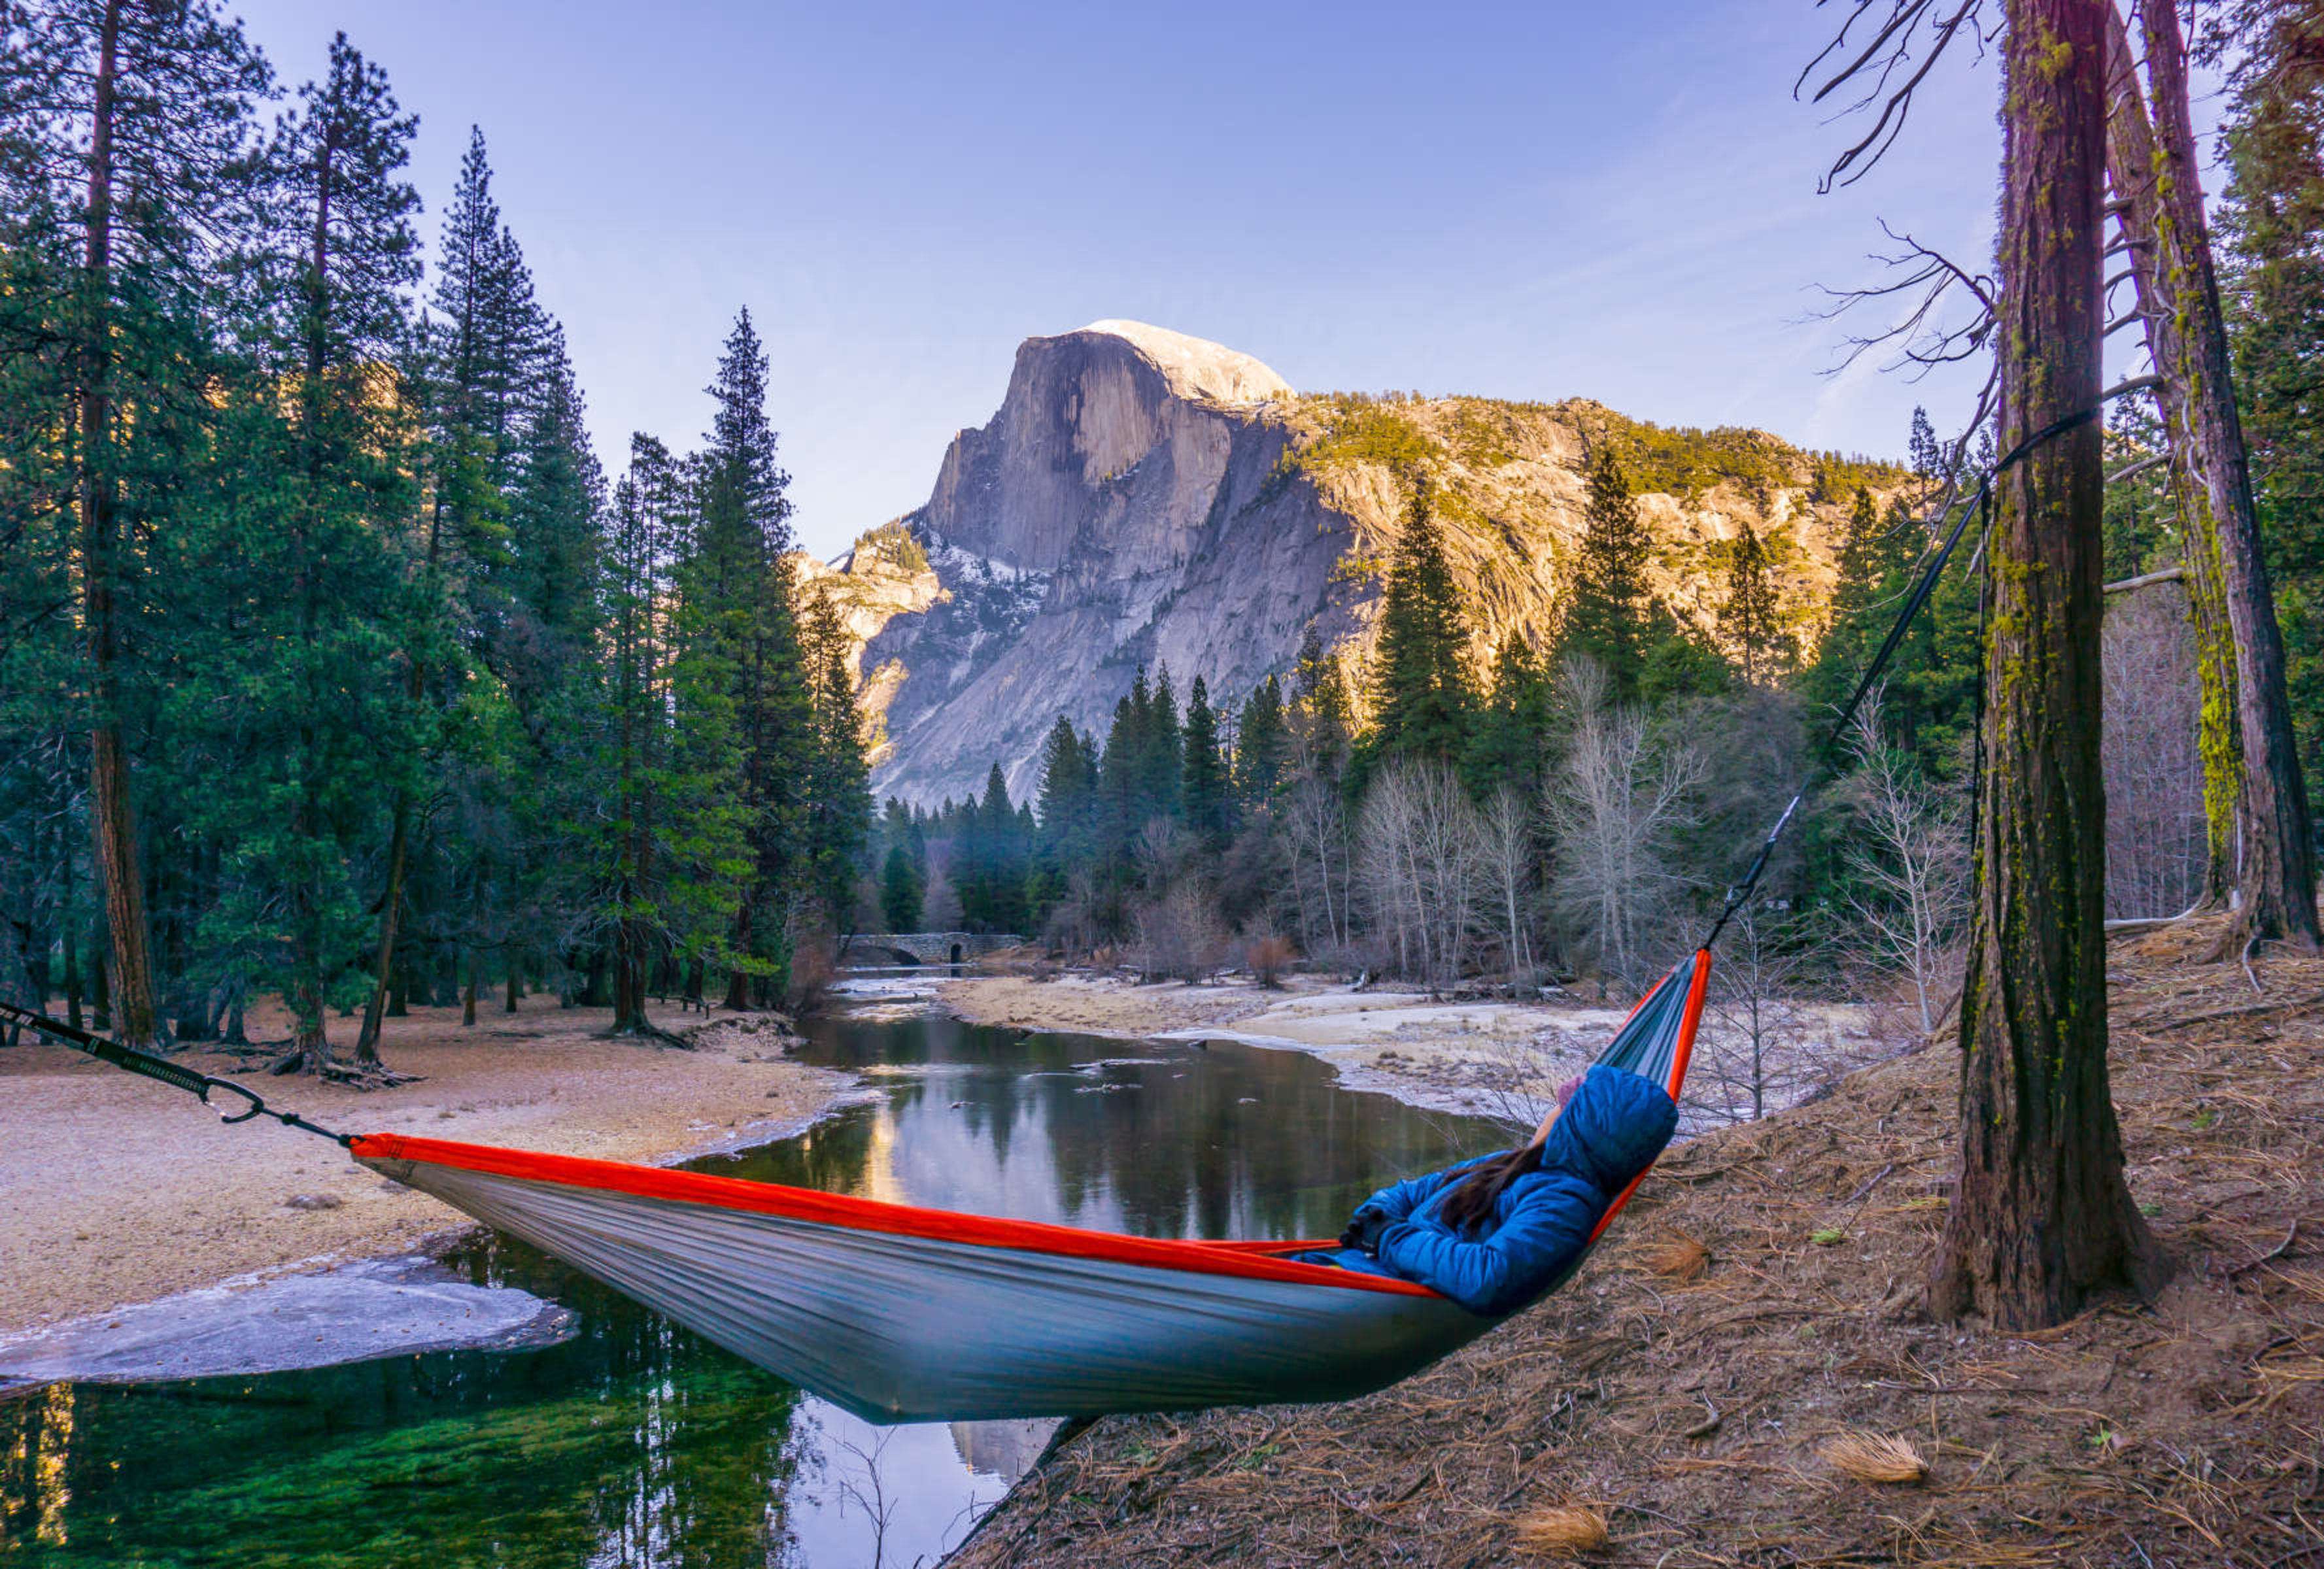 Camping in national parks